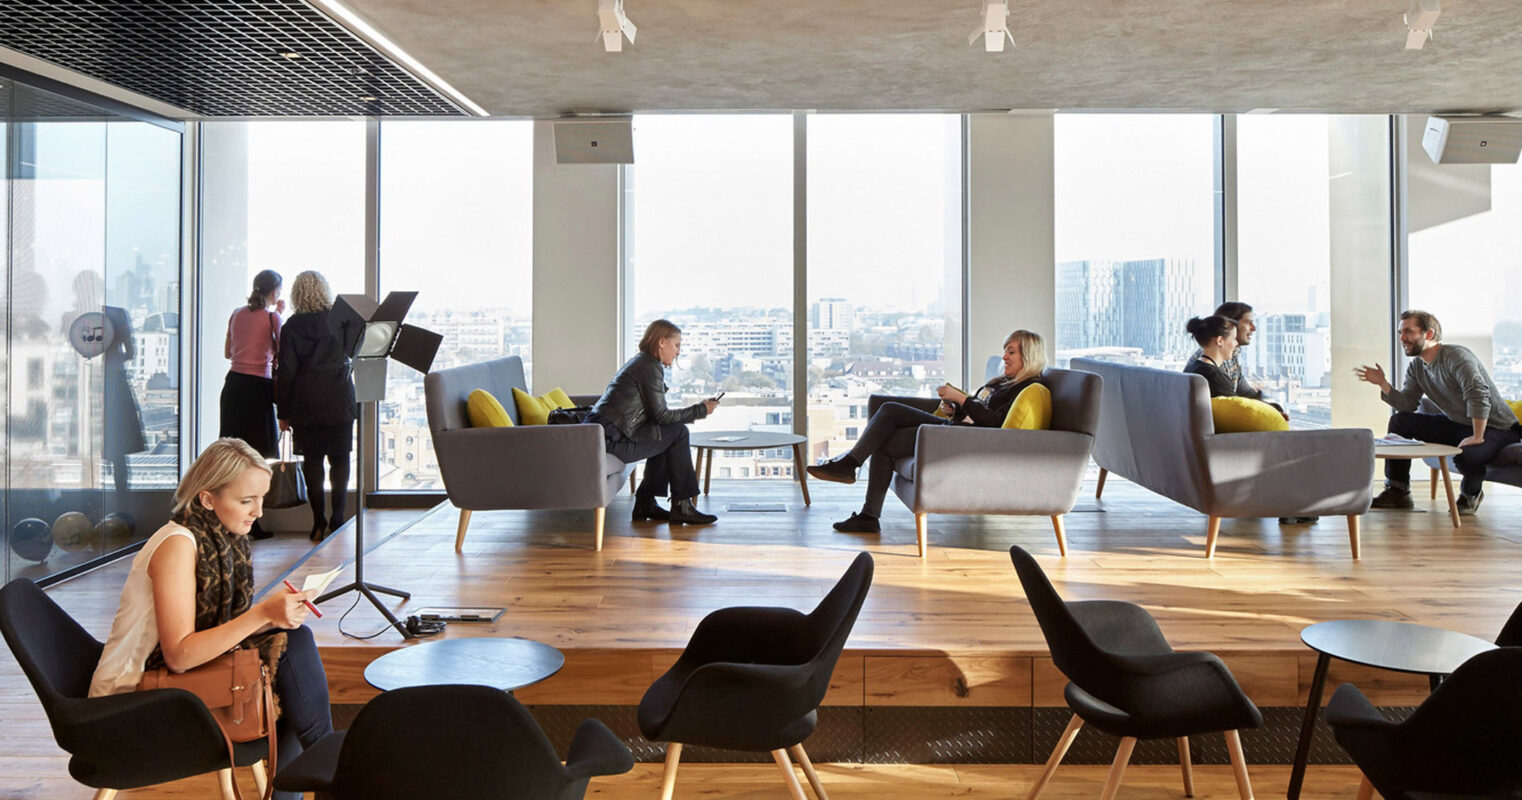 Contemporary office lounge with floor-to-ceiling windows offering a panoramic city view. The space features a mix of gray and yellow seating with sleek wood coffee tables, set on a natural wood floor and under an industrial-style black ceiling grid.